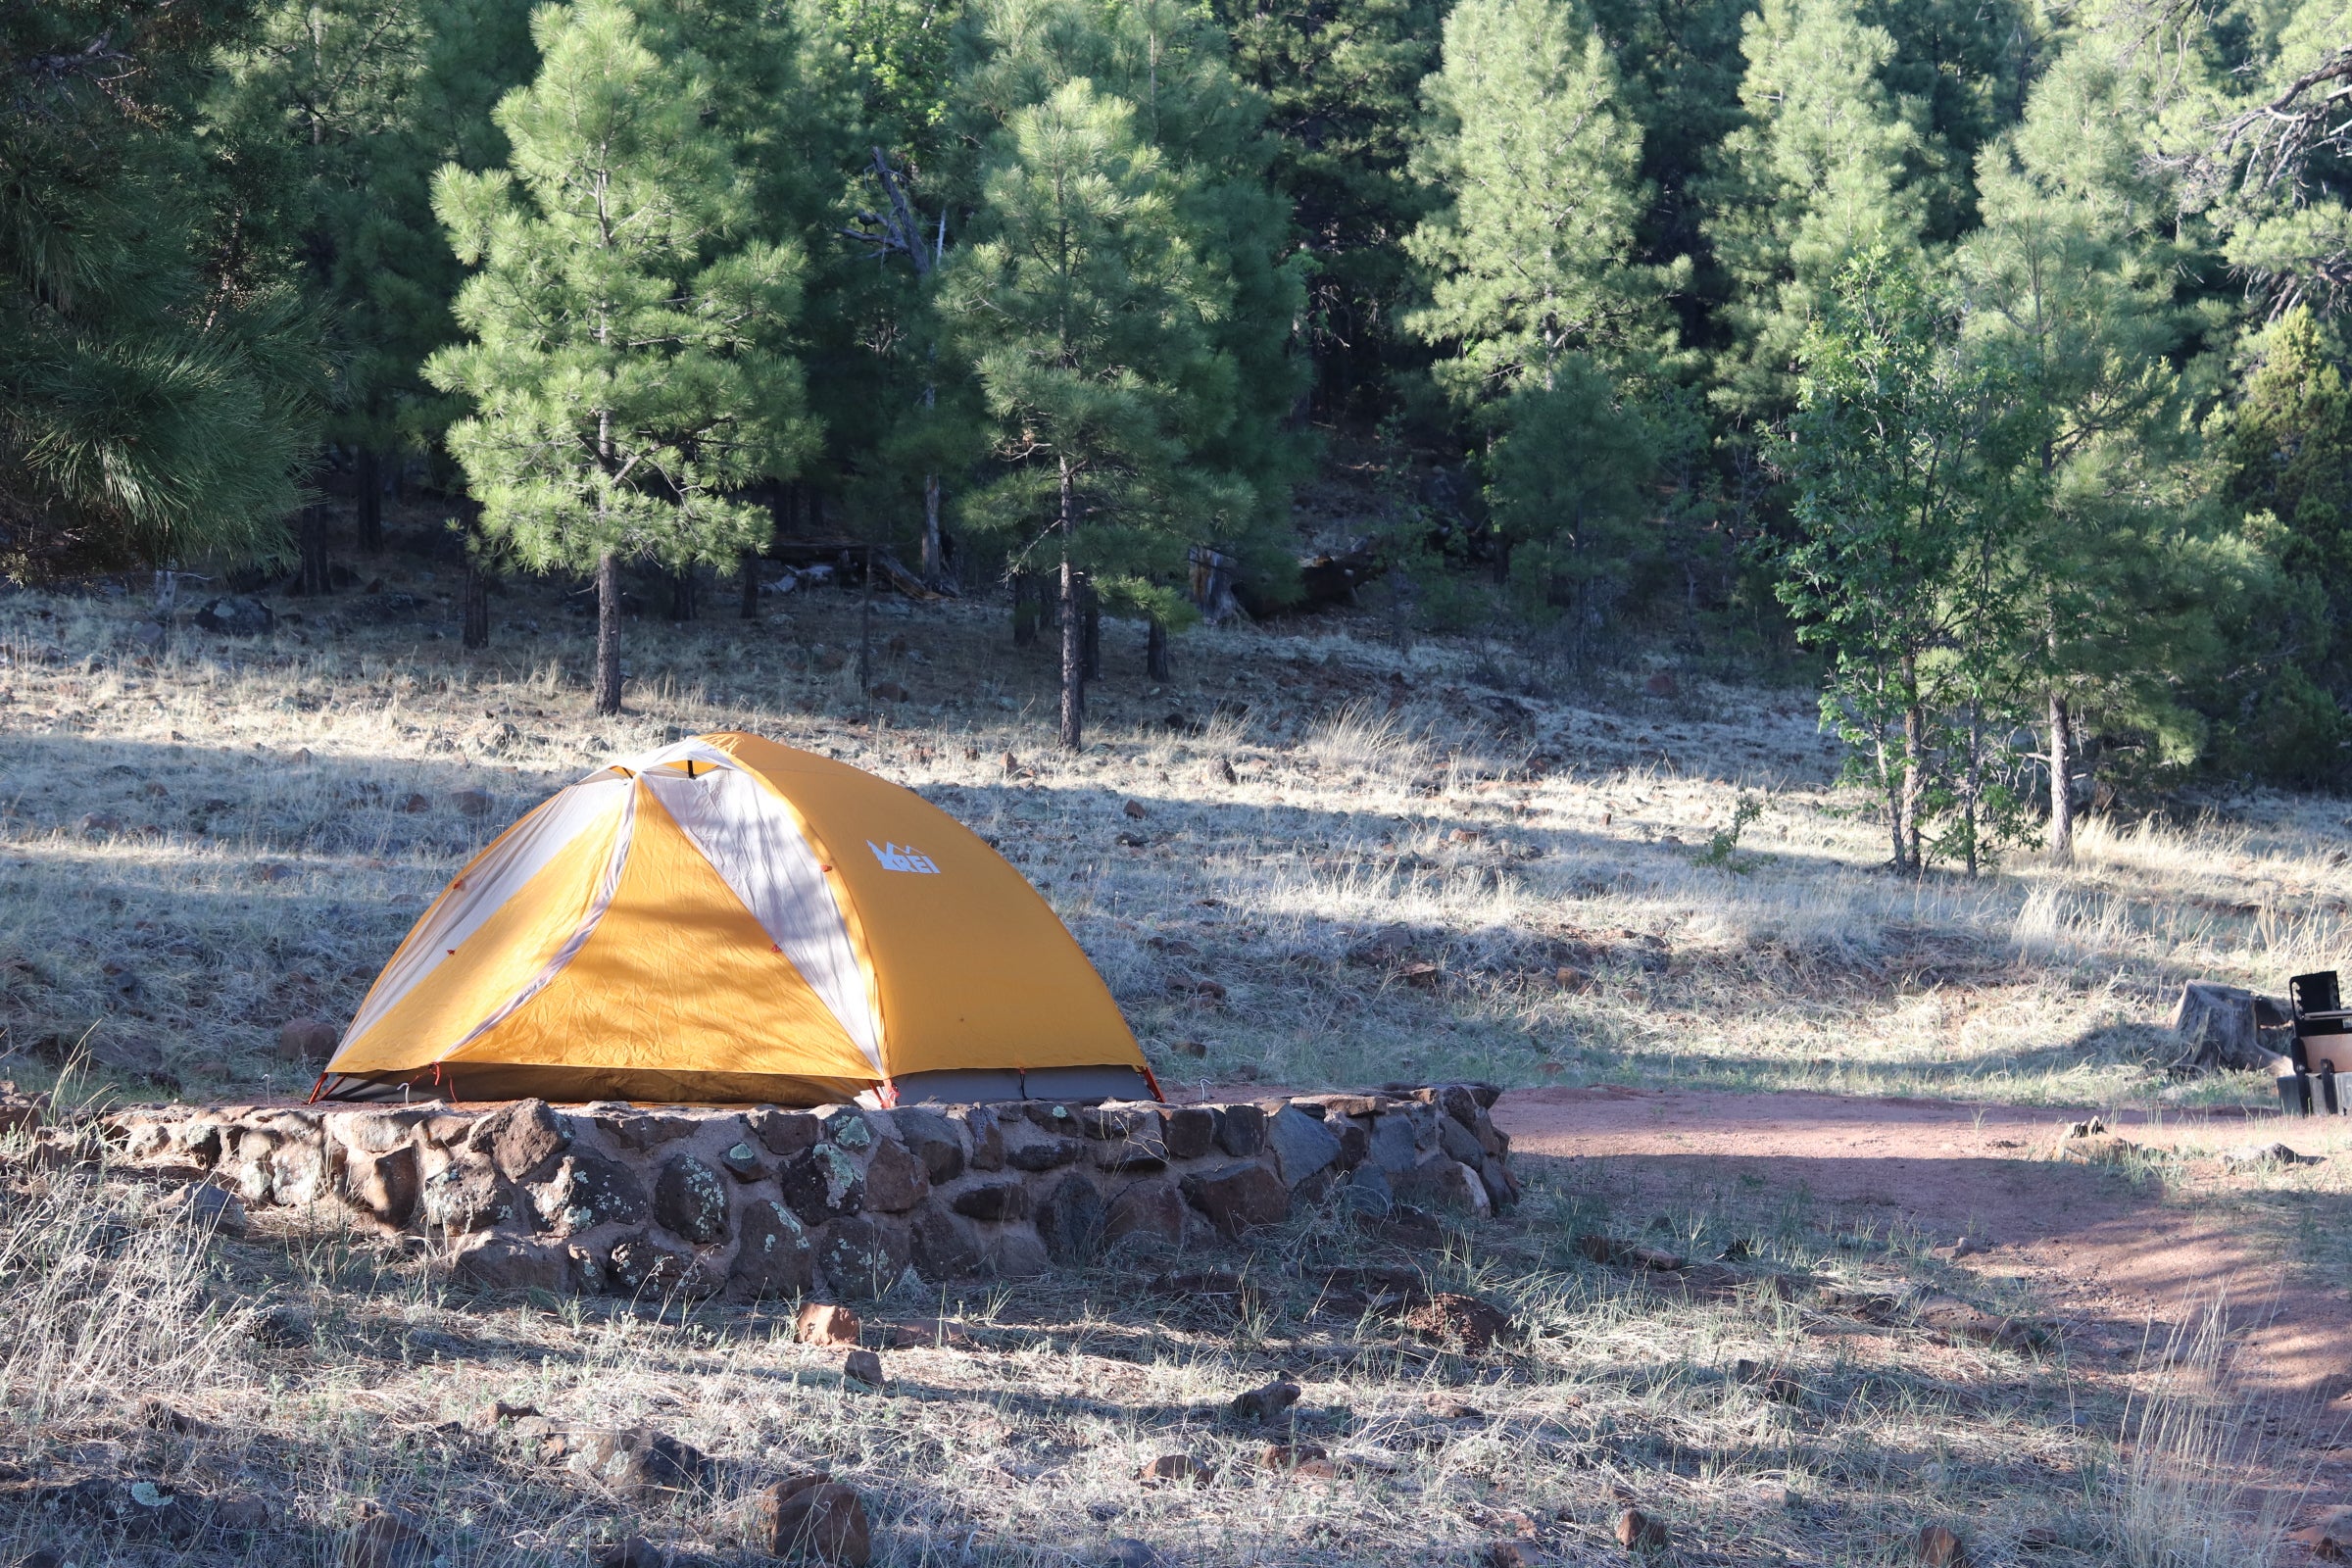 My tent site